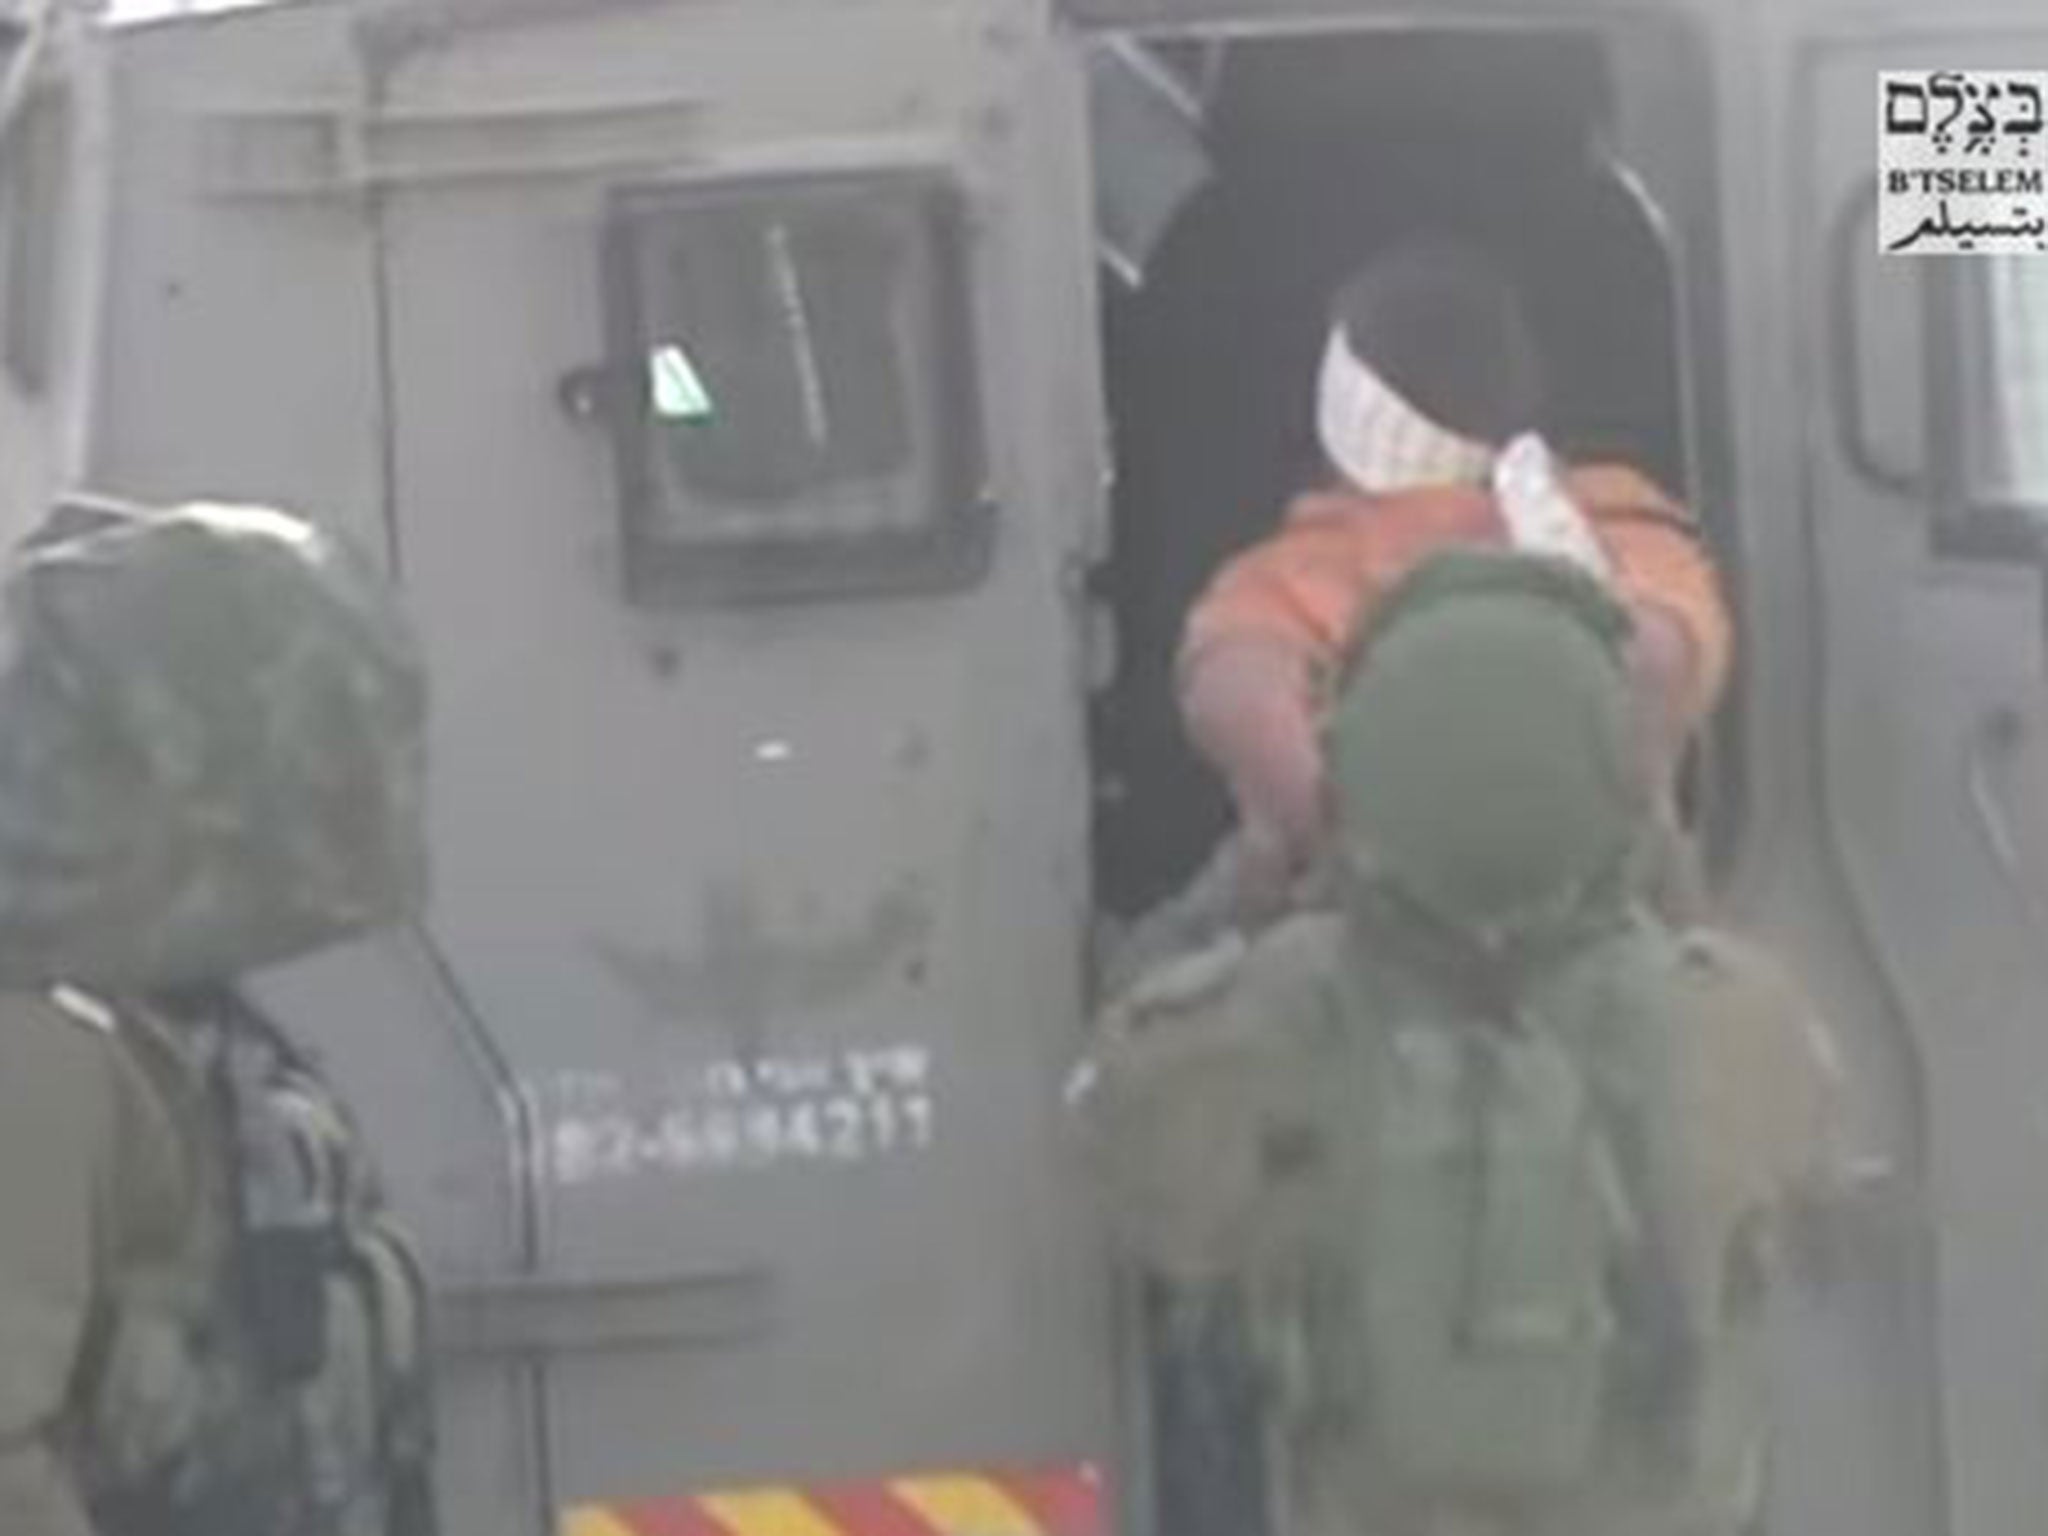 Video footage has emerged of Israeli soldiers detaining a disabled 11-year-old Palestinian boy, accused of throwing stones